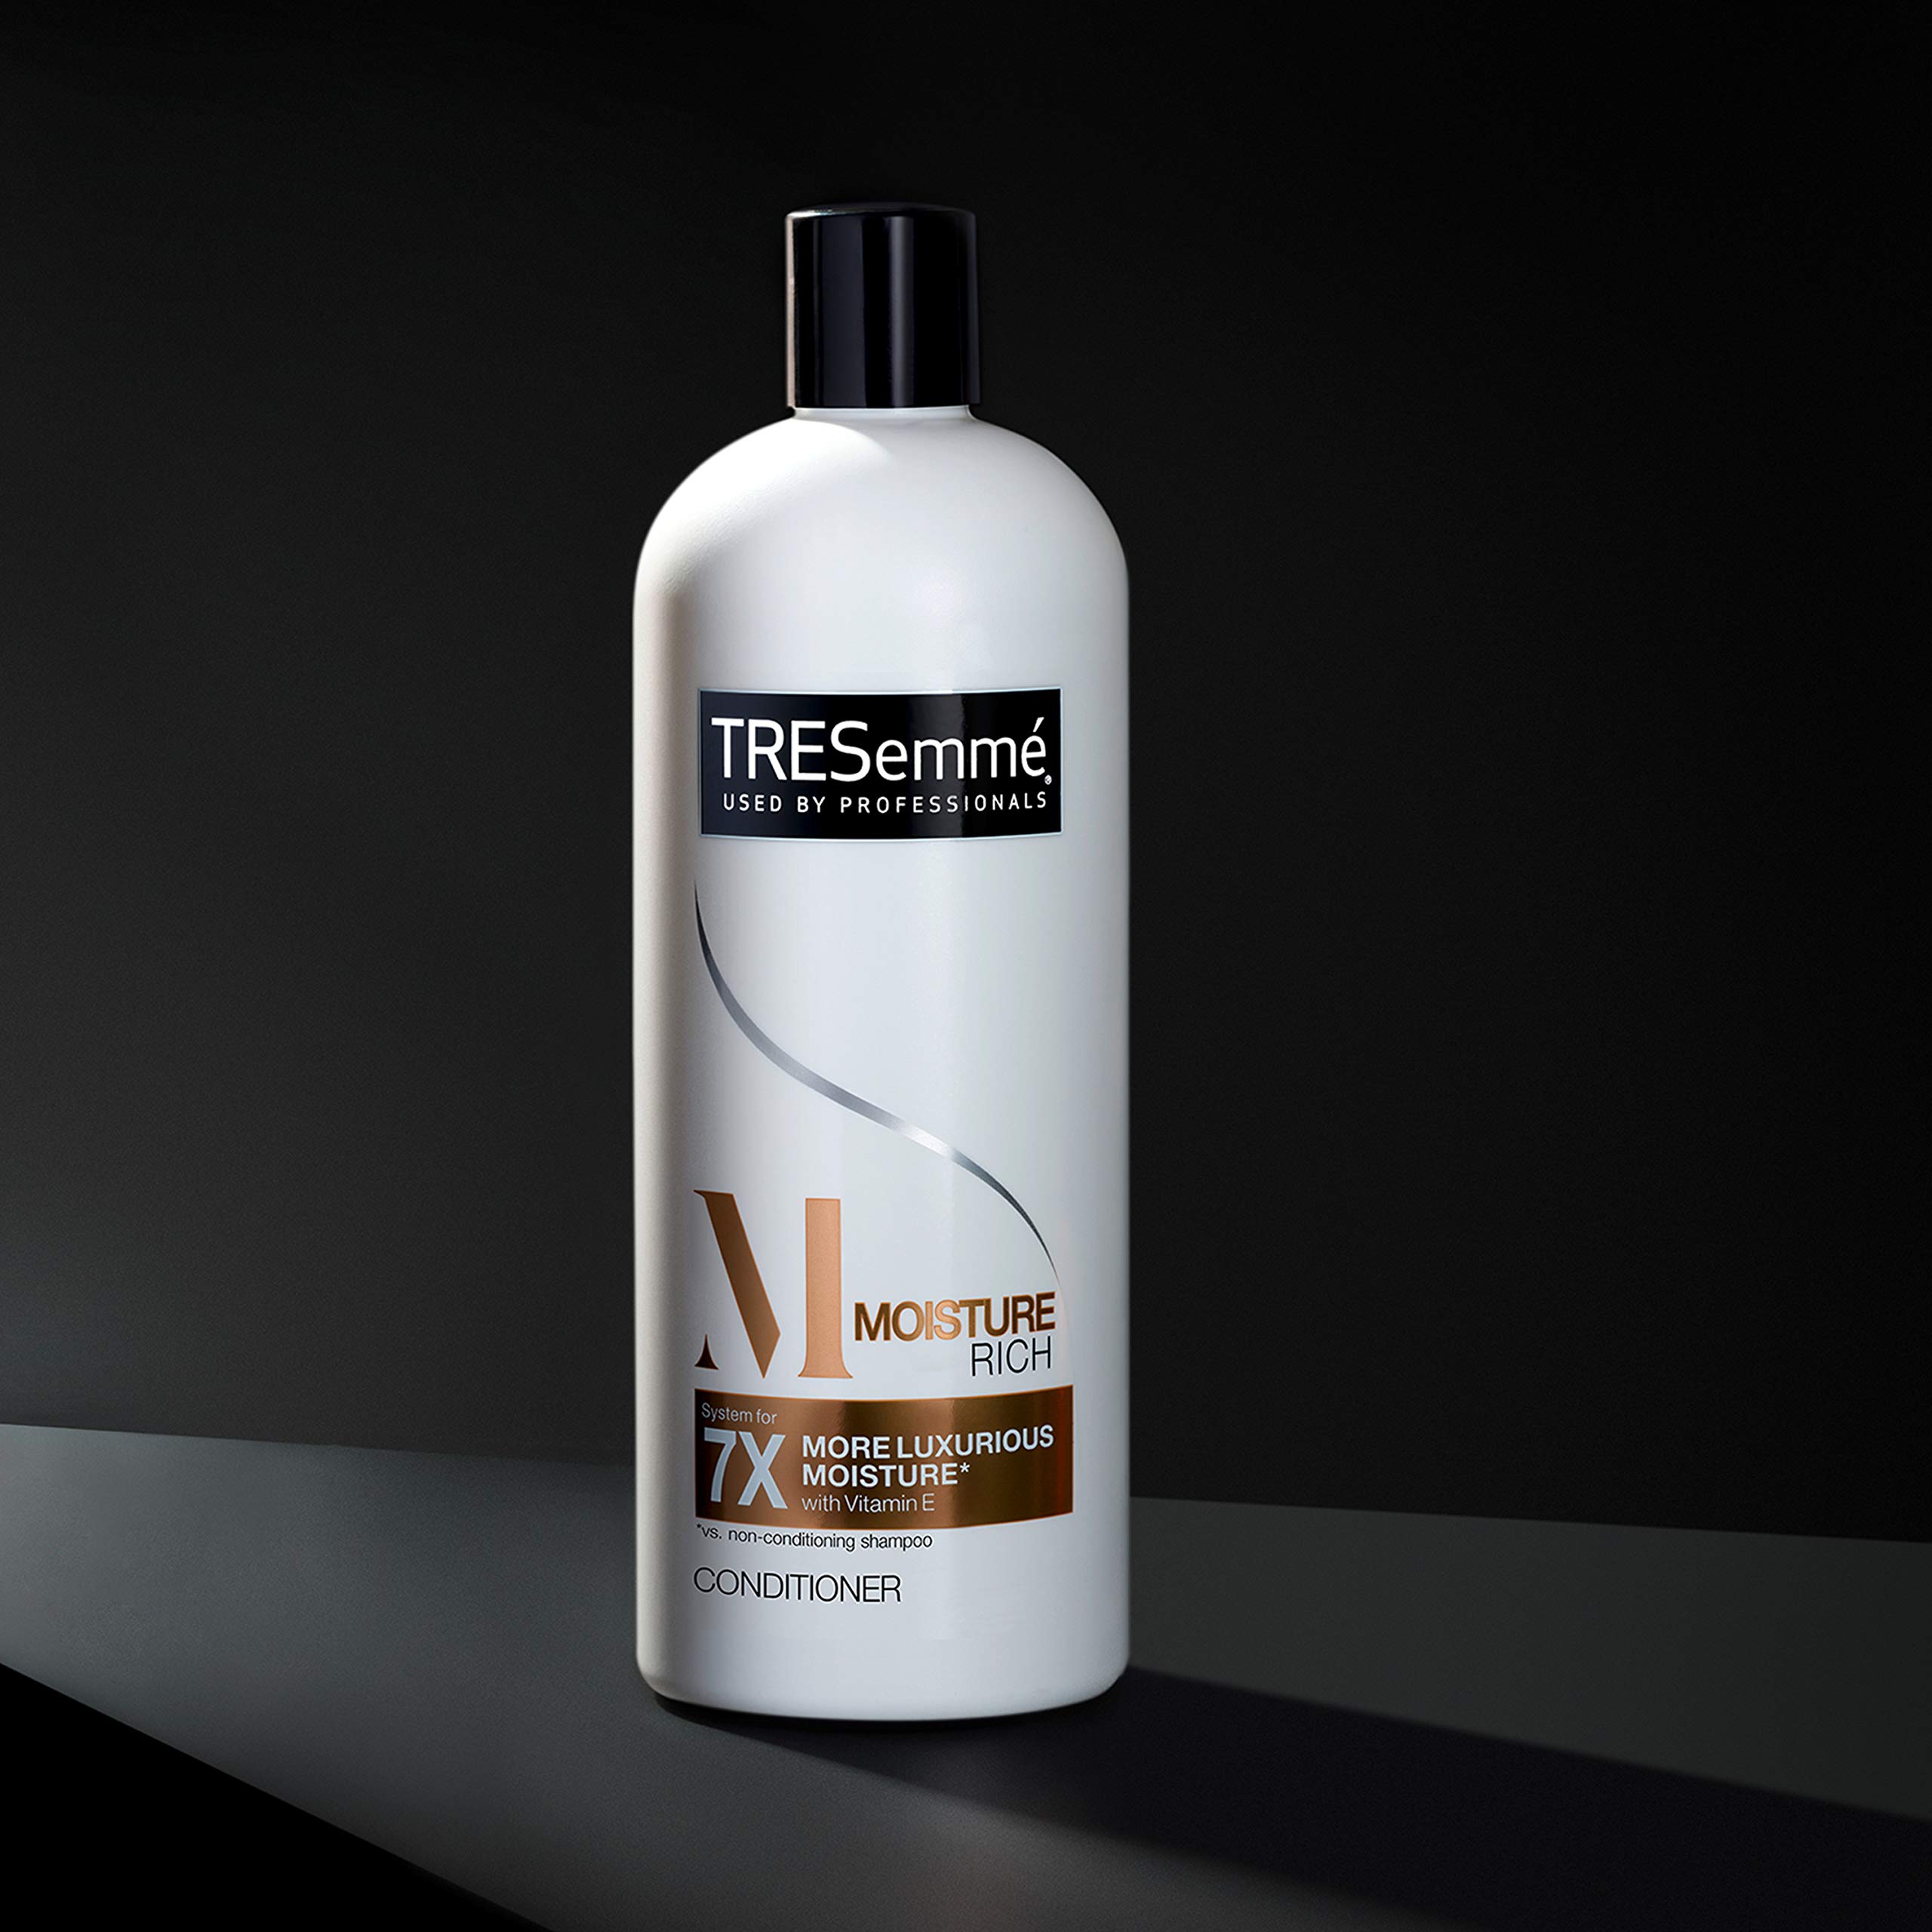 TRESemmé Conditioner Moisture Rich 3 Count for Dry Hair Professional Quality Salon-Healthy Look and Shine Moisture Rich Formulated with Vitamin E and Biotin 28 oz